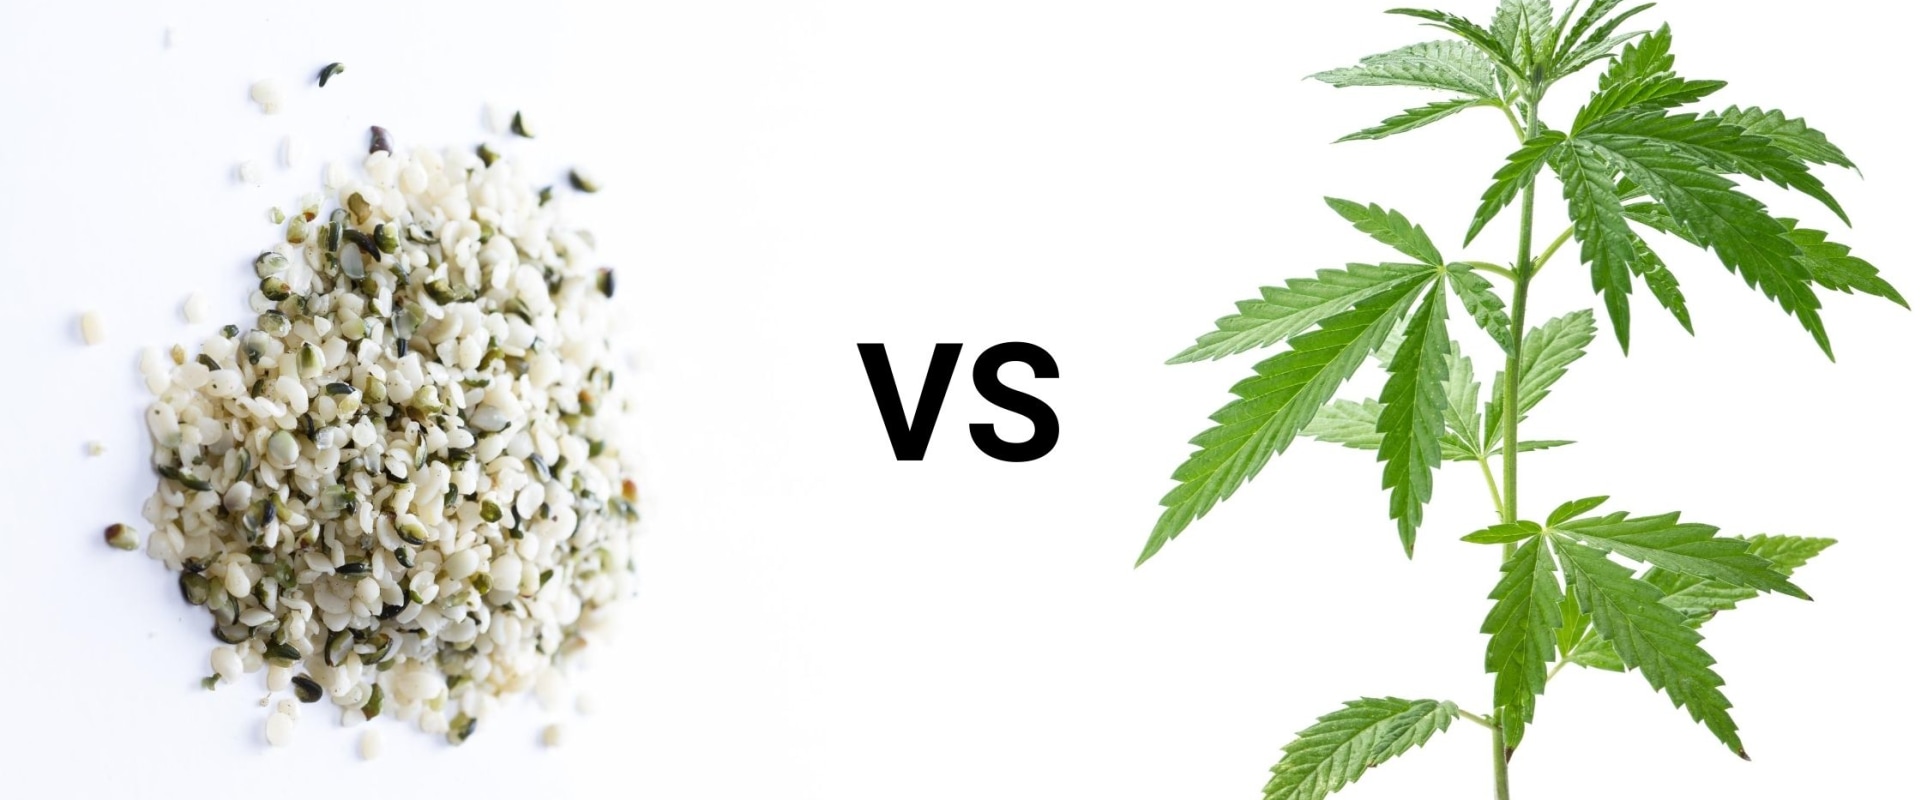 Is there a difference between cbd and hemp?